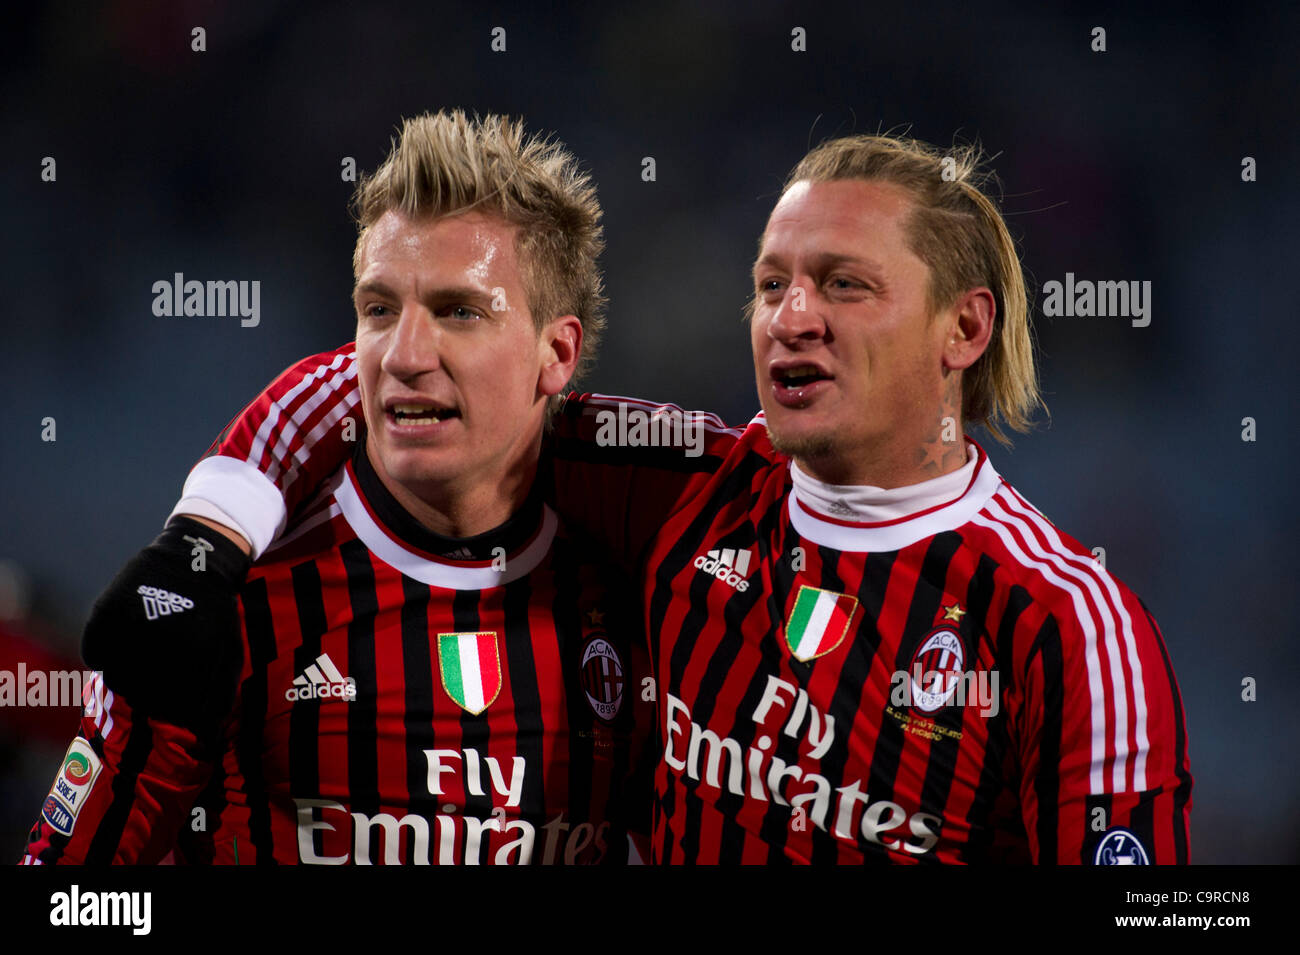 (L-R) Maxi Lopez, Philippe Mexes (Milan), FEBRUARY 11, 2012 - Football / Soccer : Maxi Lopez and Philippe Mexes of AC Milan celebrate after the Italian 'Serie A' match between Udinese 1-2 AC Milan at Stadio Friuli in Udine, Italy. (Photo by Maurizio Borsari/AFLO) [0855] Stock Photo